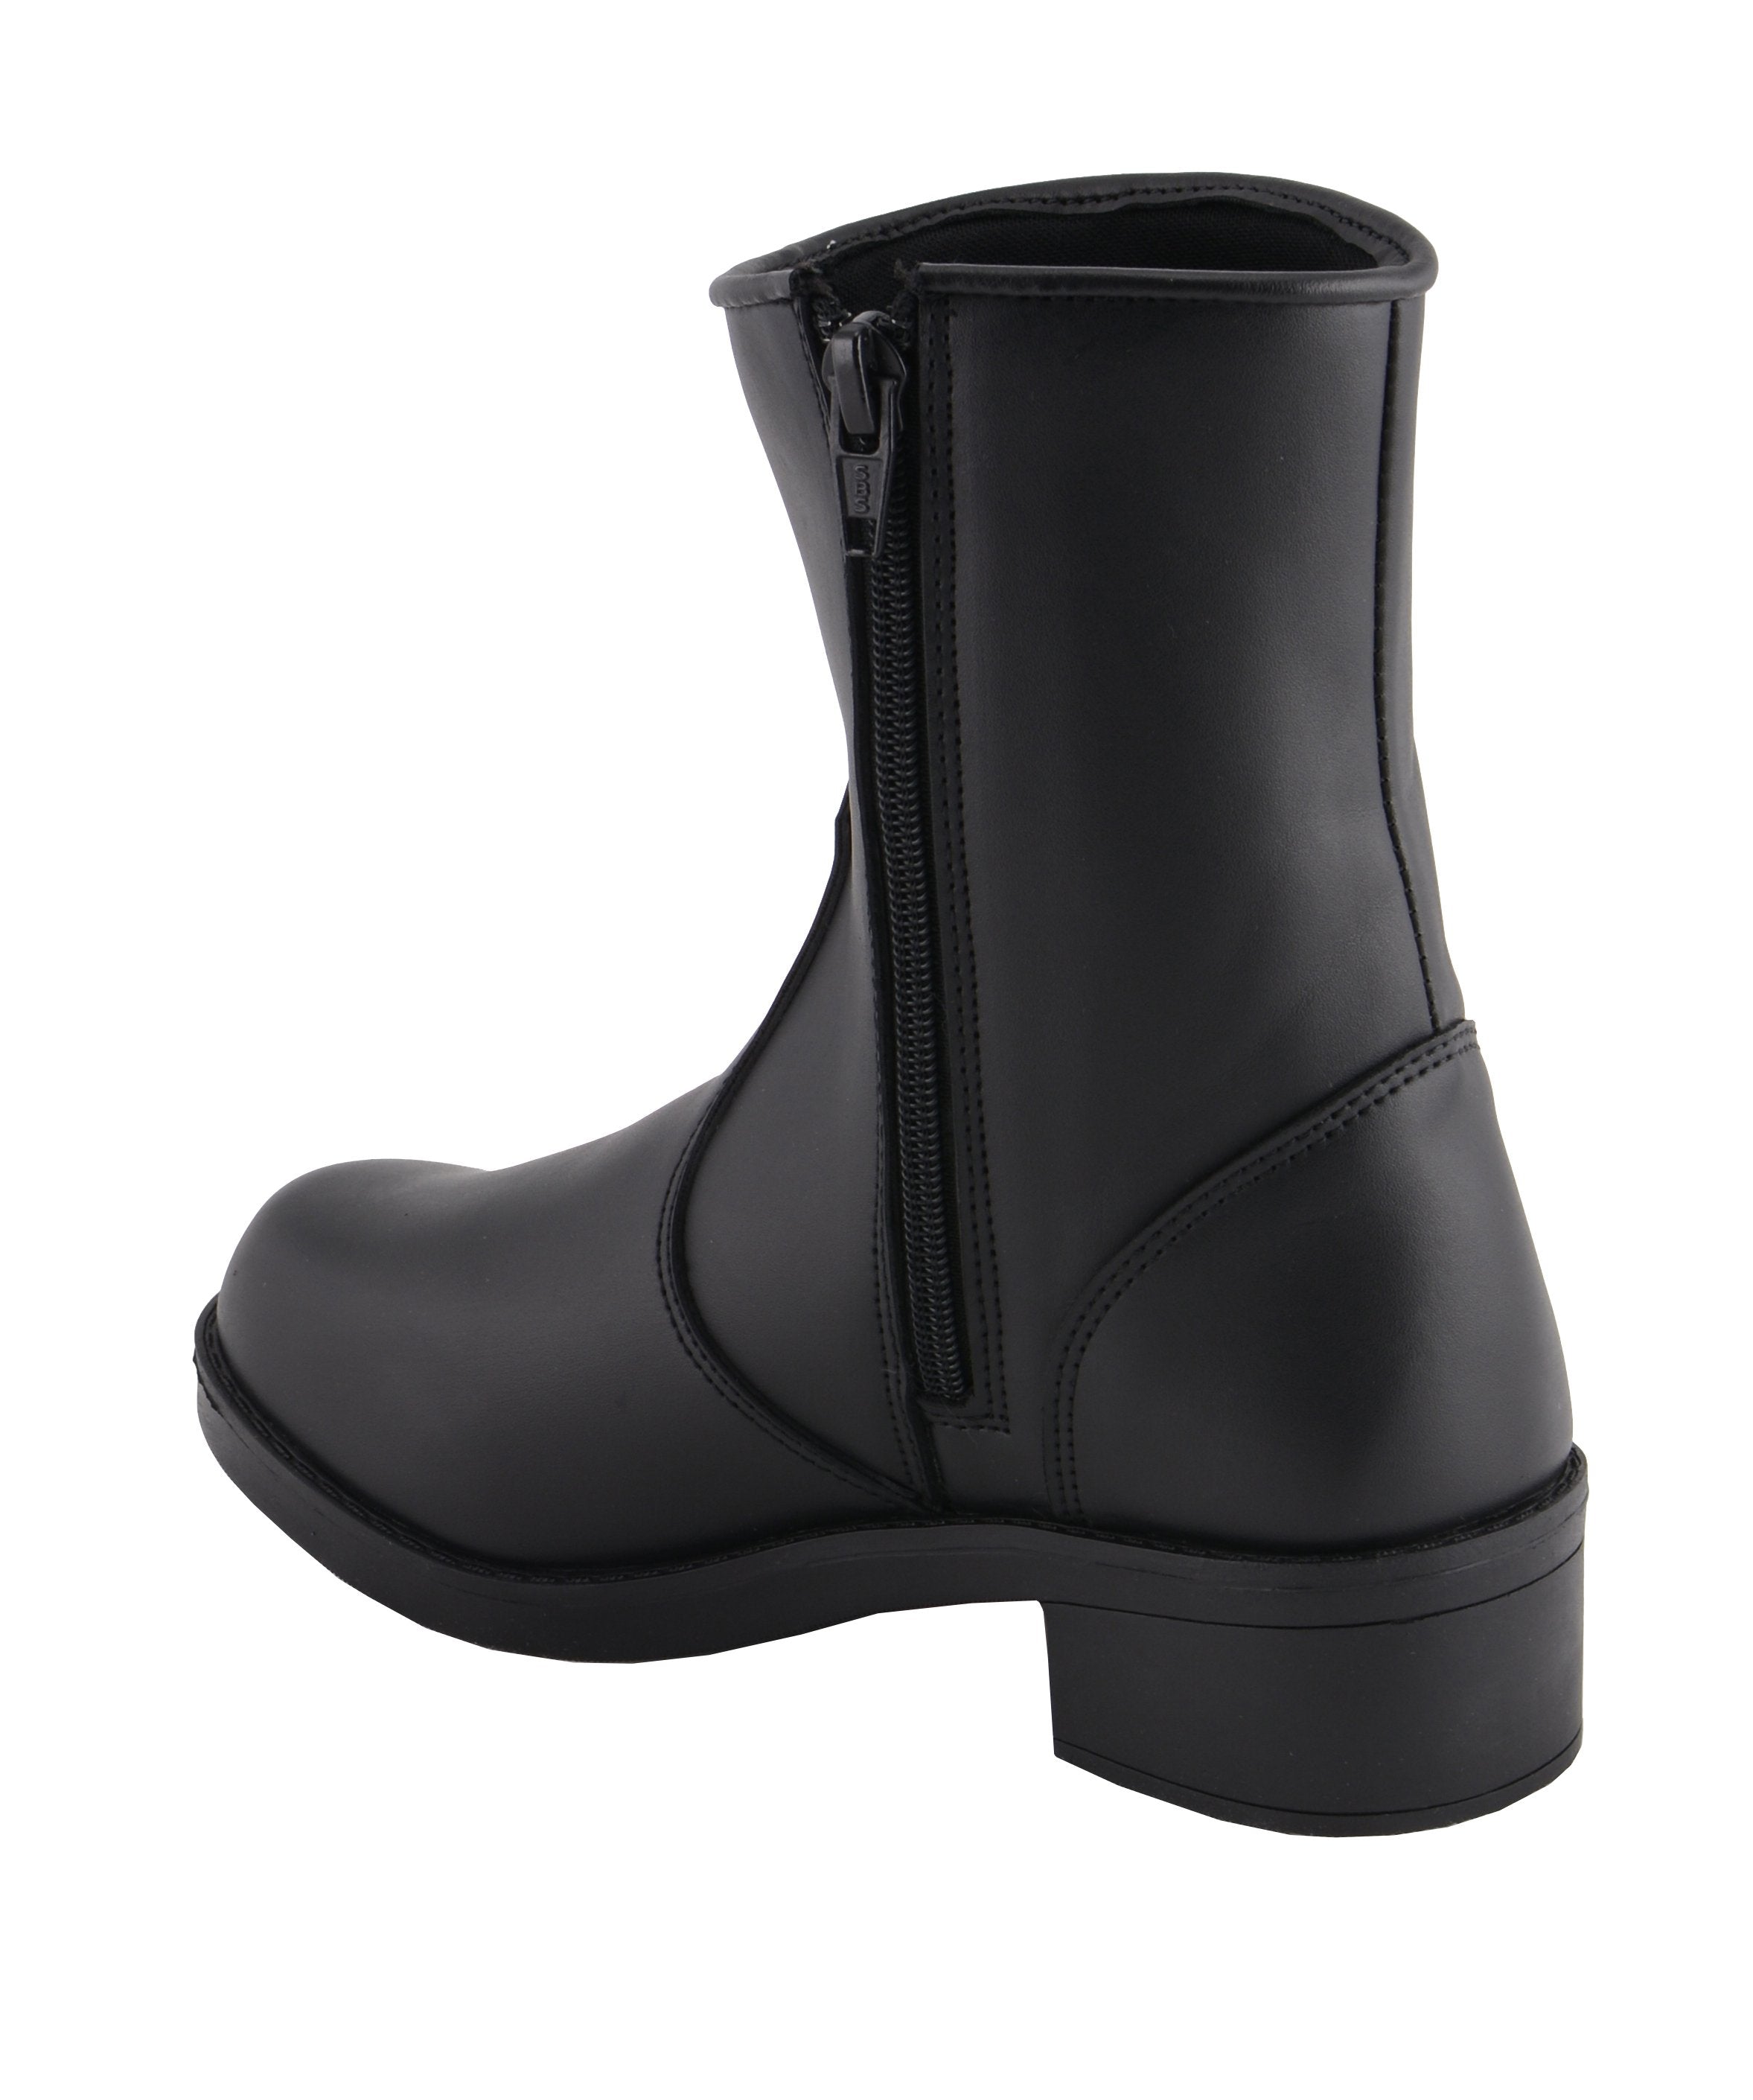 Milwaukee Leather MBL9480 Ladies Black Super Clean Riding Boots with Side Zipper Entry